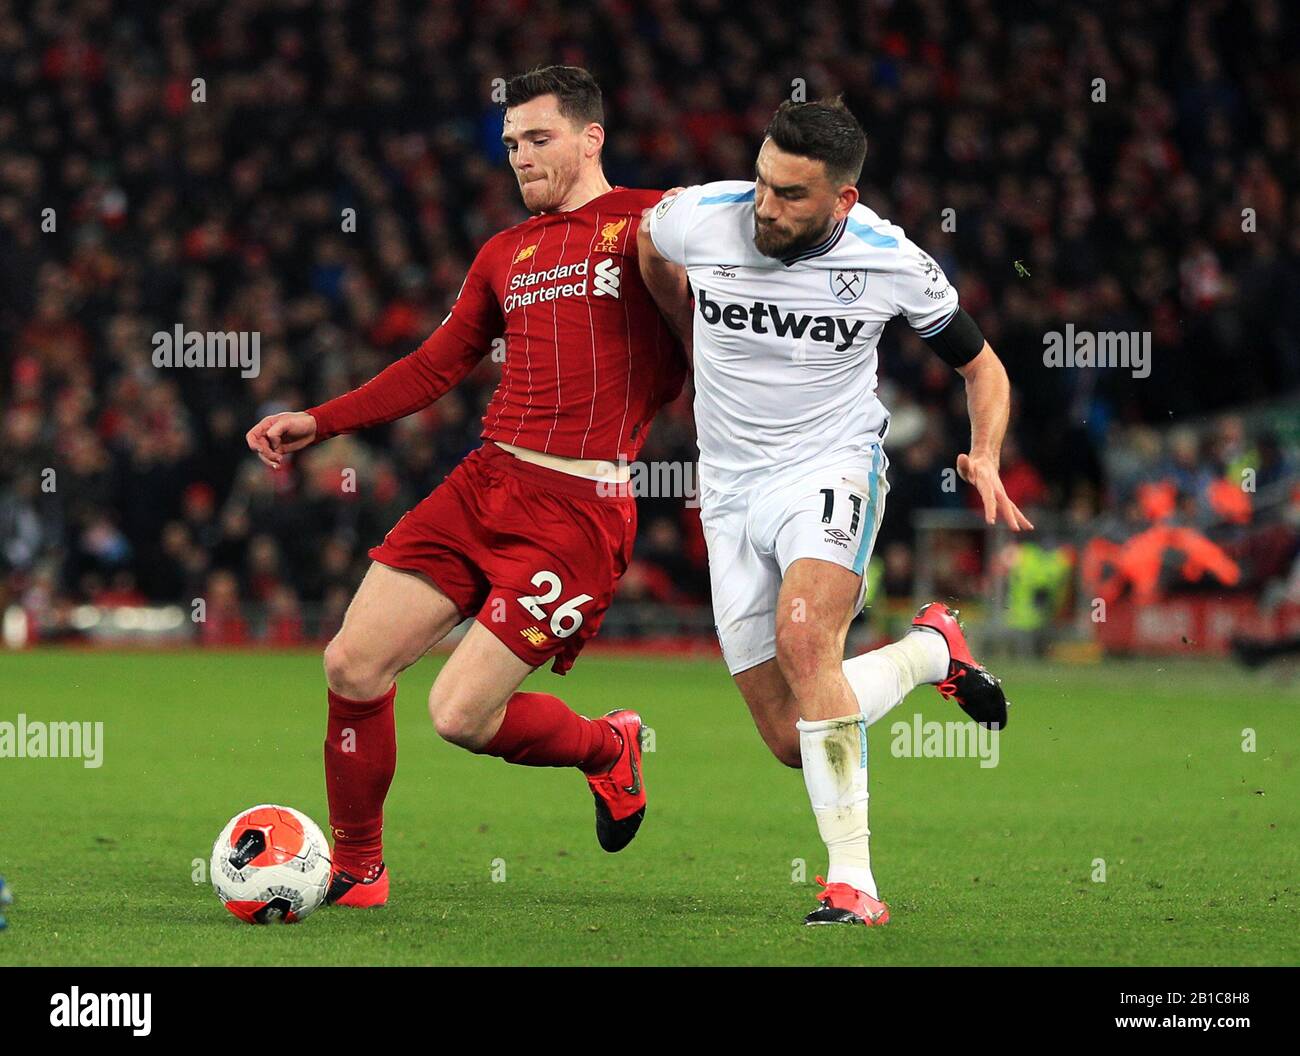 Liverpool's Andrew Robertson (left) and West Ham United's Robert Snodgrass battle for the ball during the Premier League match at Anfield, Liverpool. Stock Photo